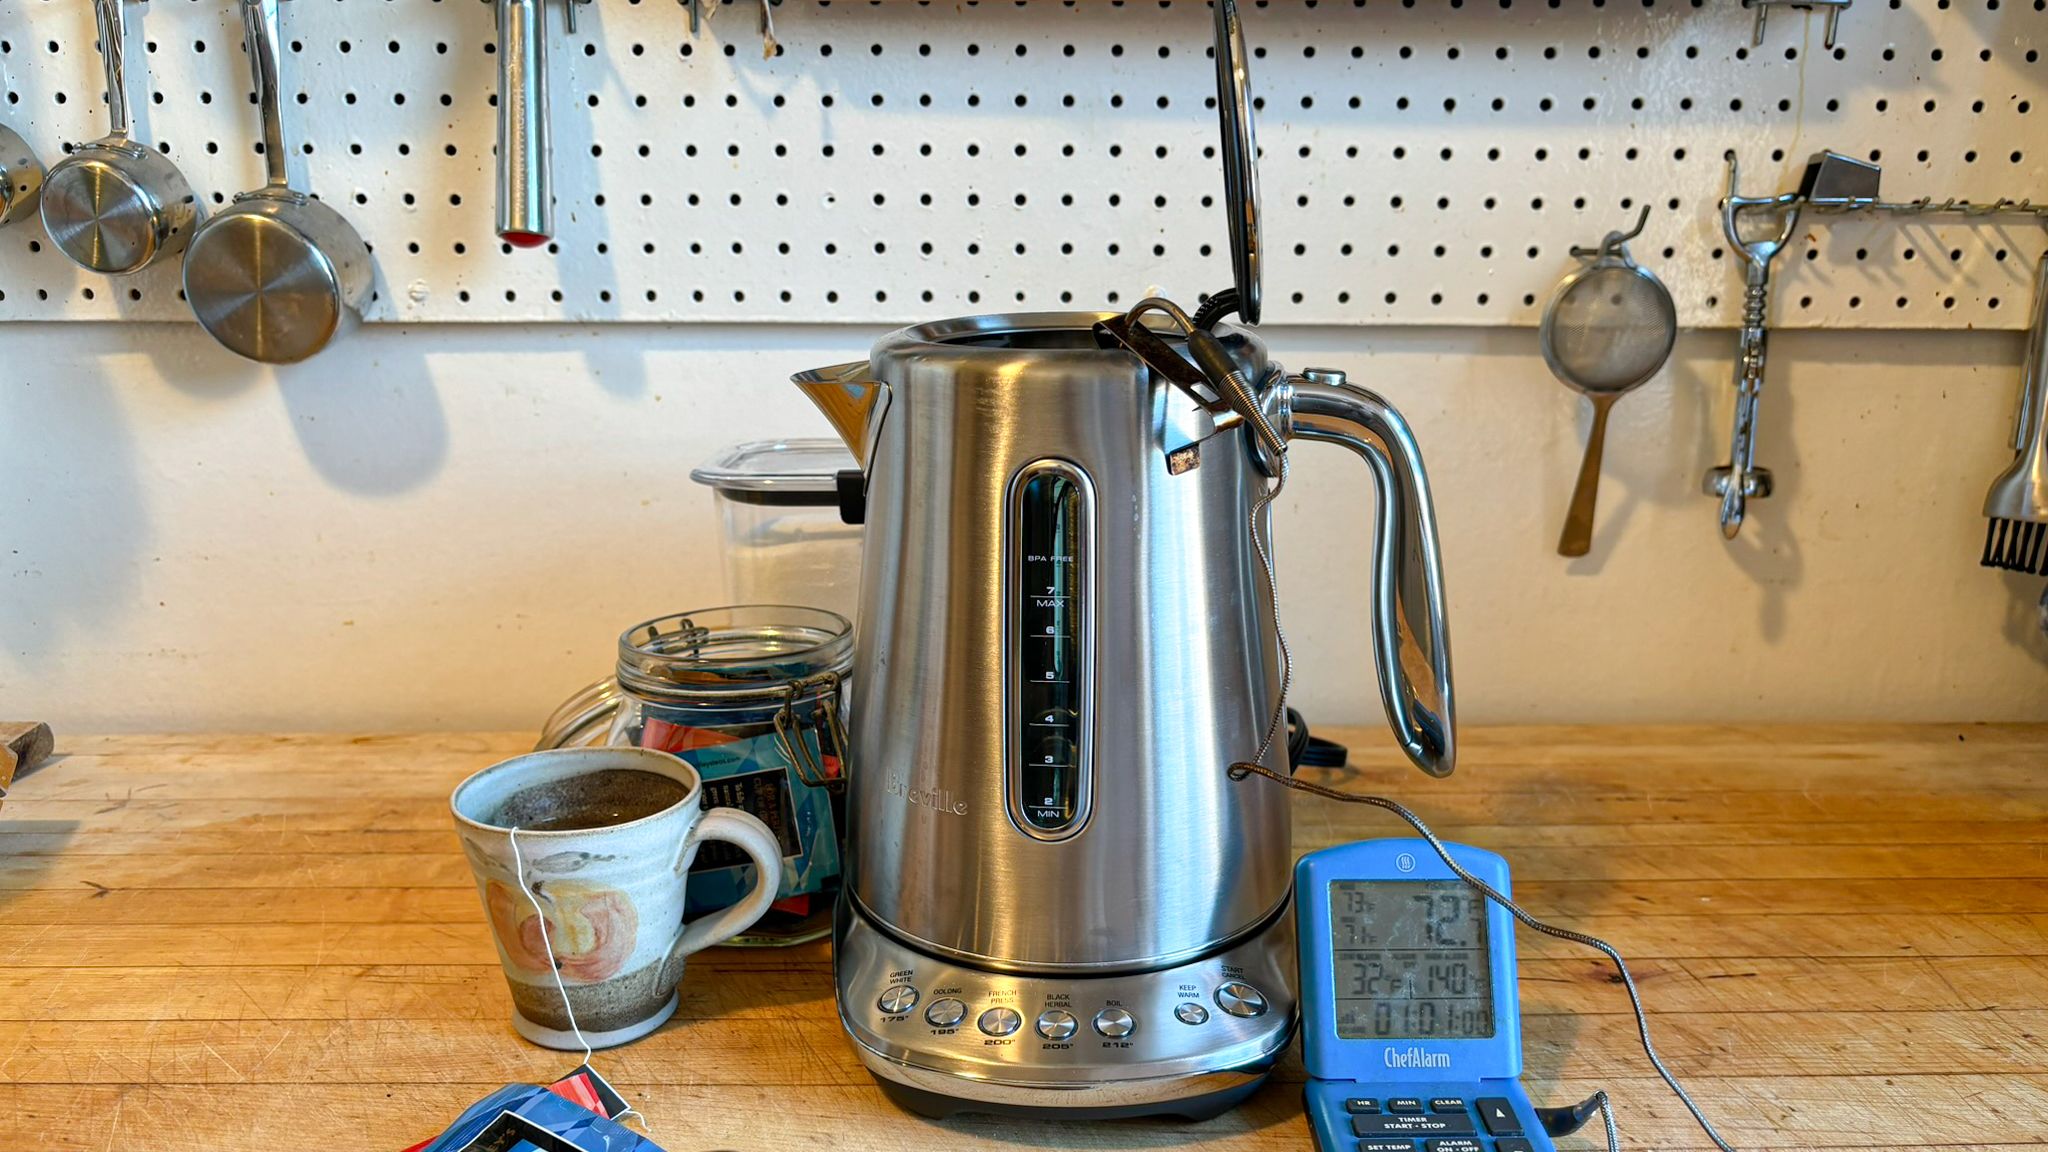 Breville electric kettle next to temperature gauge and mug